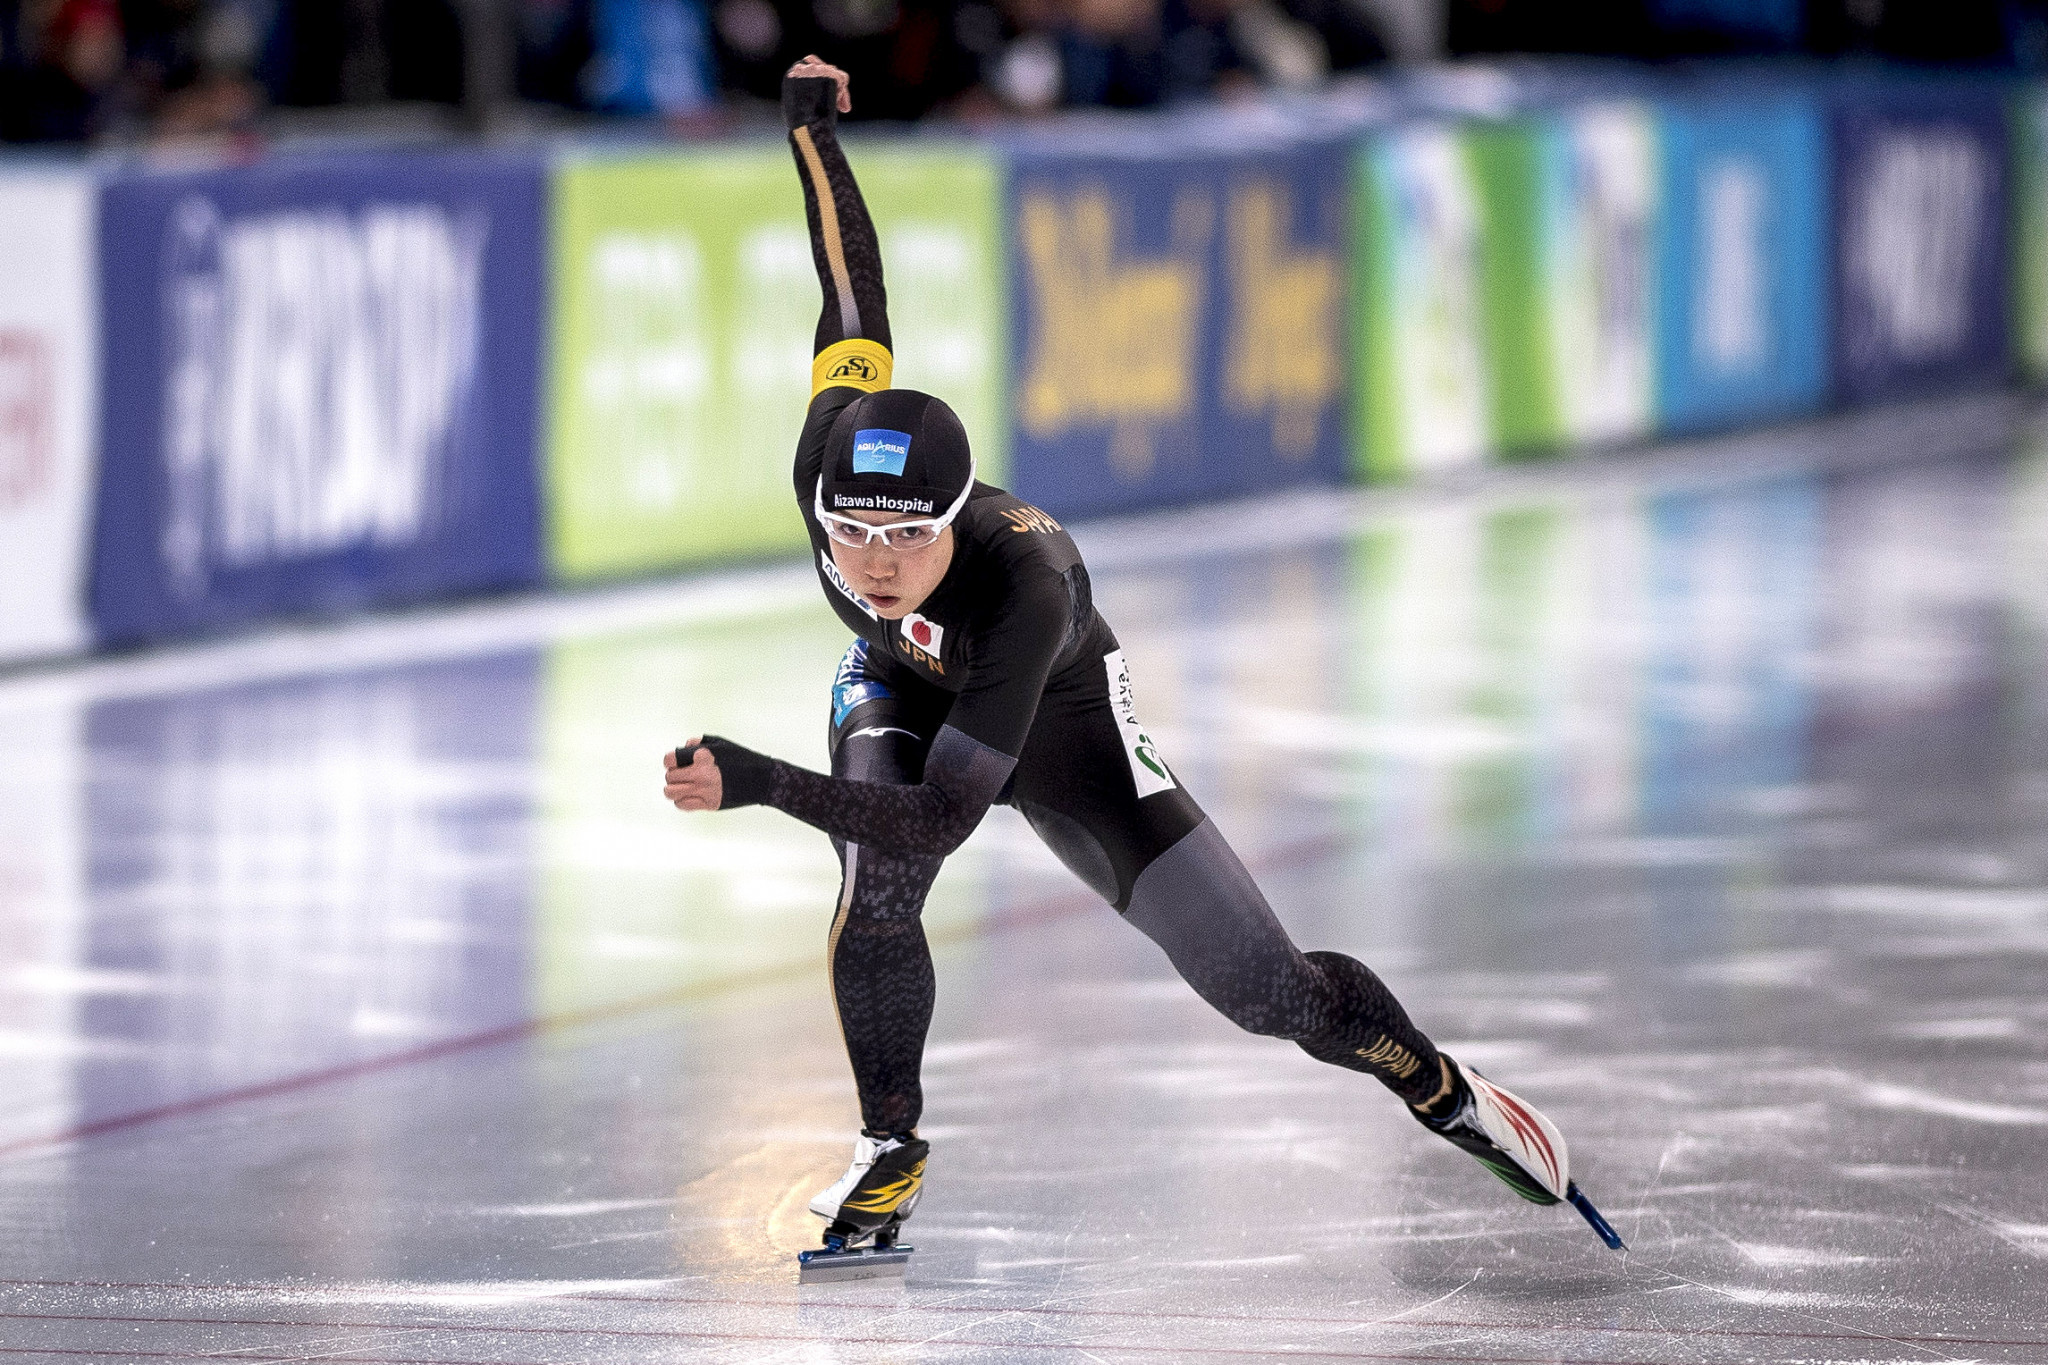 Nao Kodaira will hope to maintain her impressive early season form ©Getty Images